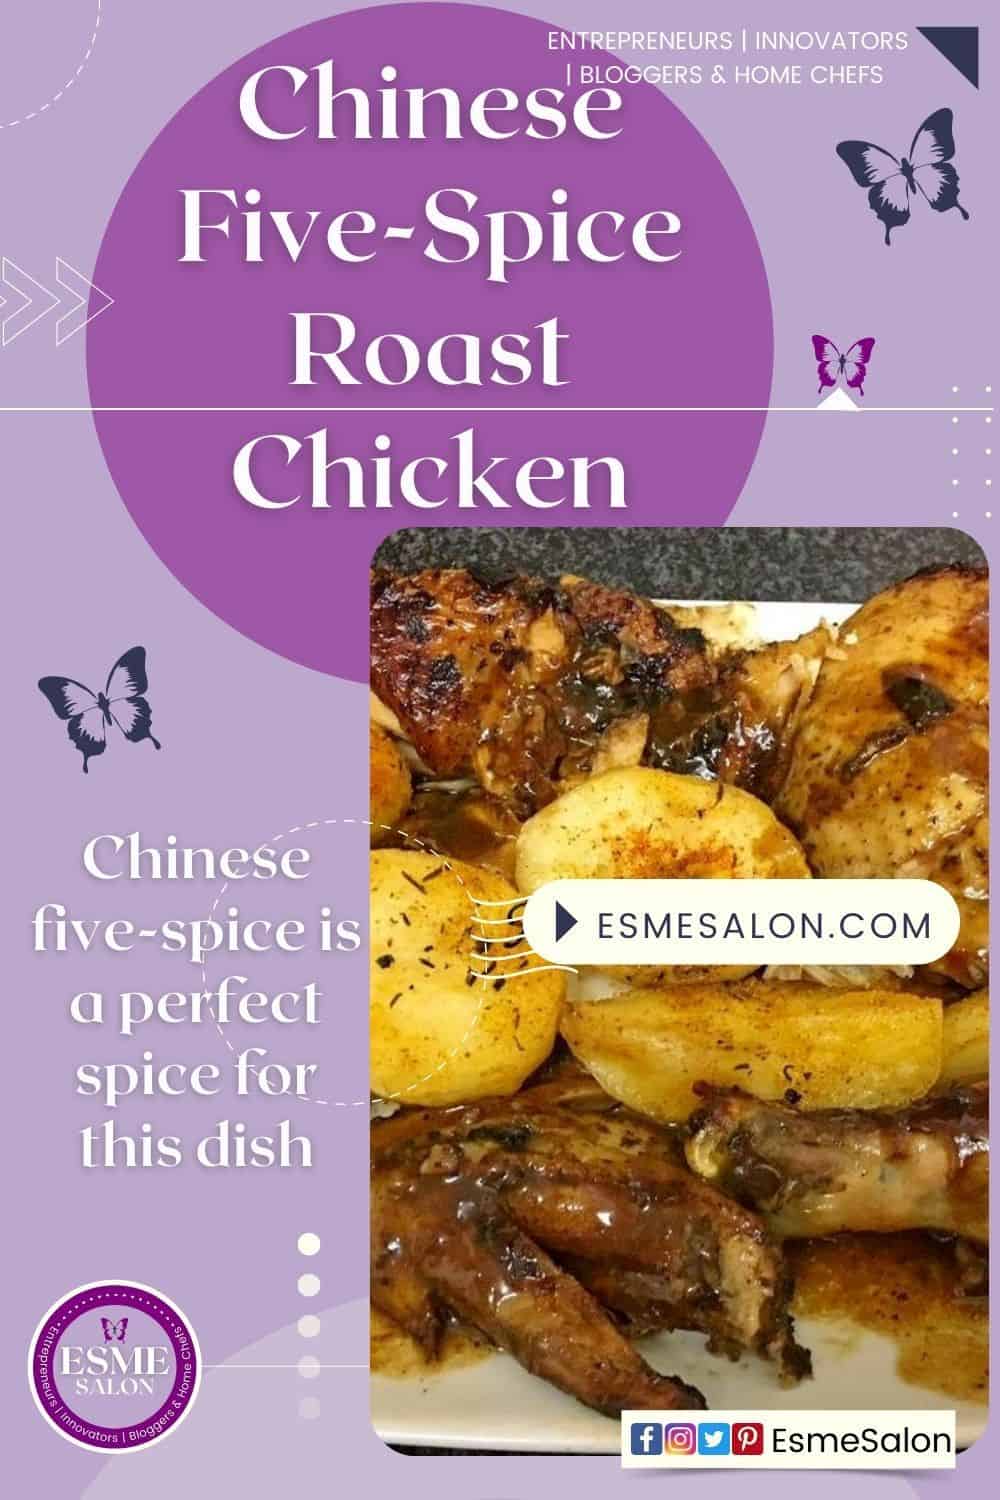 Chinese Five-Spice Roast Chicken with potatoes and sauce